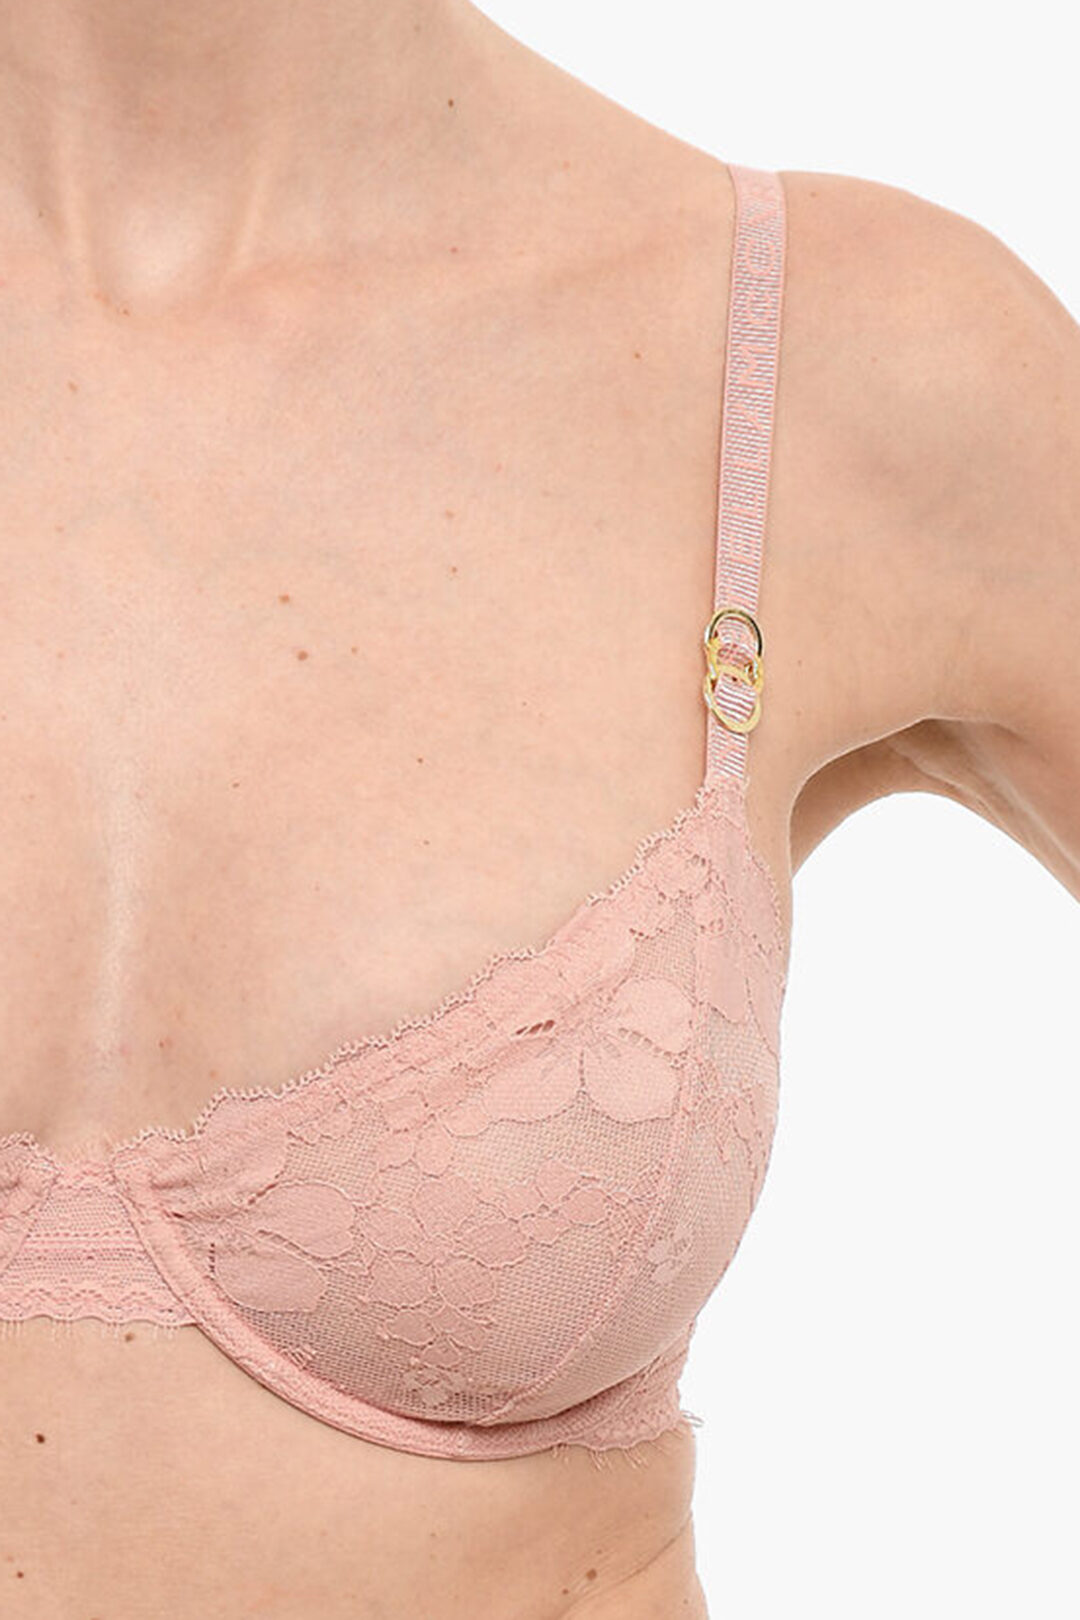 https://data.glamood.com/imgprodotto/underwire-lace-bra-with-gold-tone-metal-applications_1368247_zoom.jpg